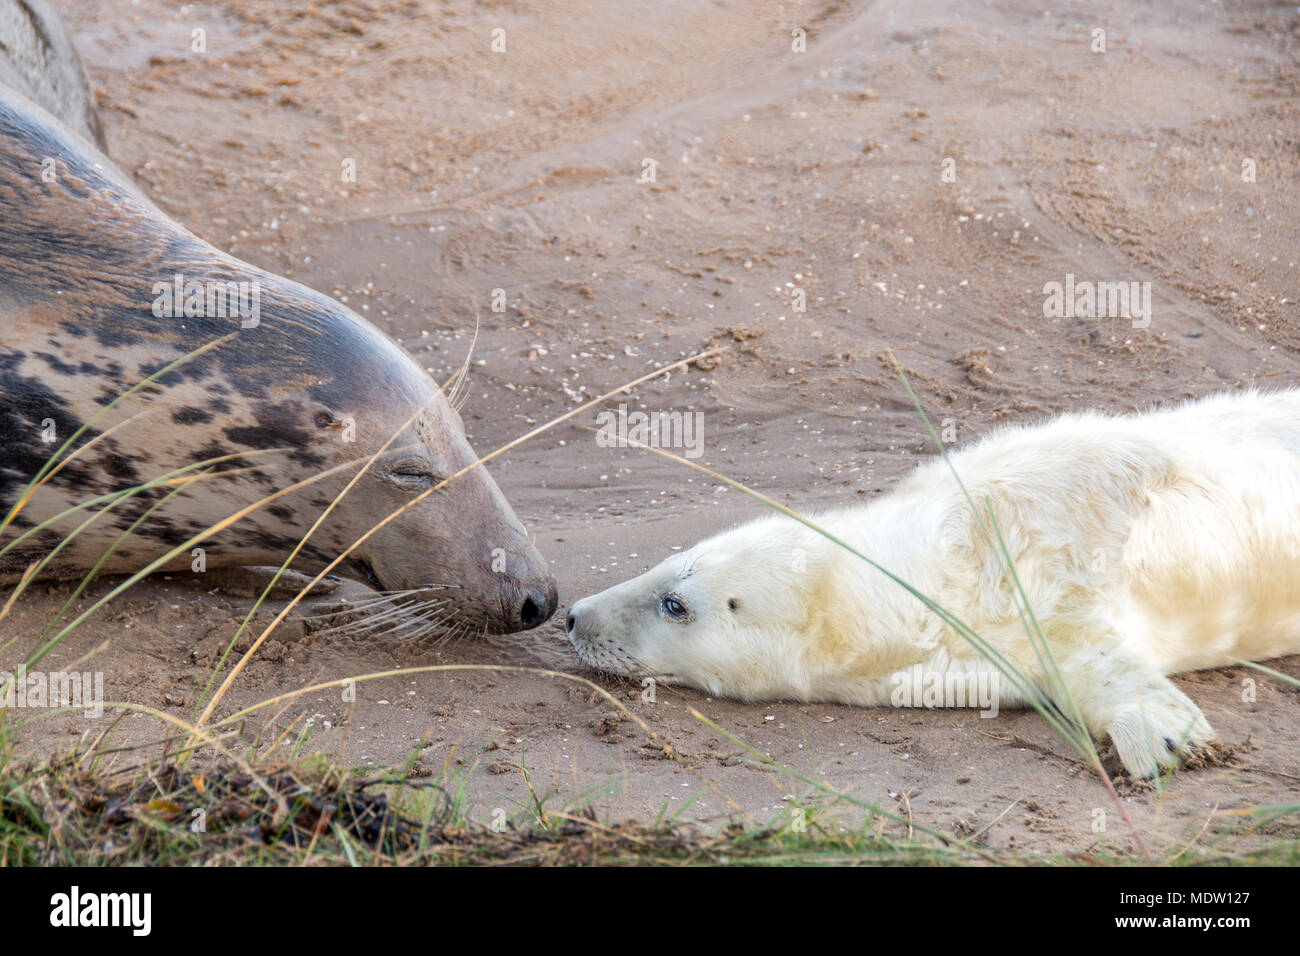 Donna Nook, Lincolnshire, UK – Nov 16: Caring mother checks her cute fluffy baby grey seal pup as it lays on the beach on 16 Nov 2016 at Donna Nook Se Stock Photo